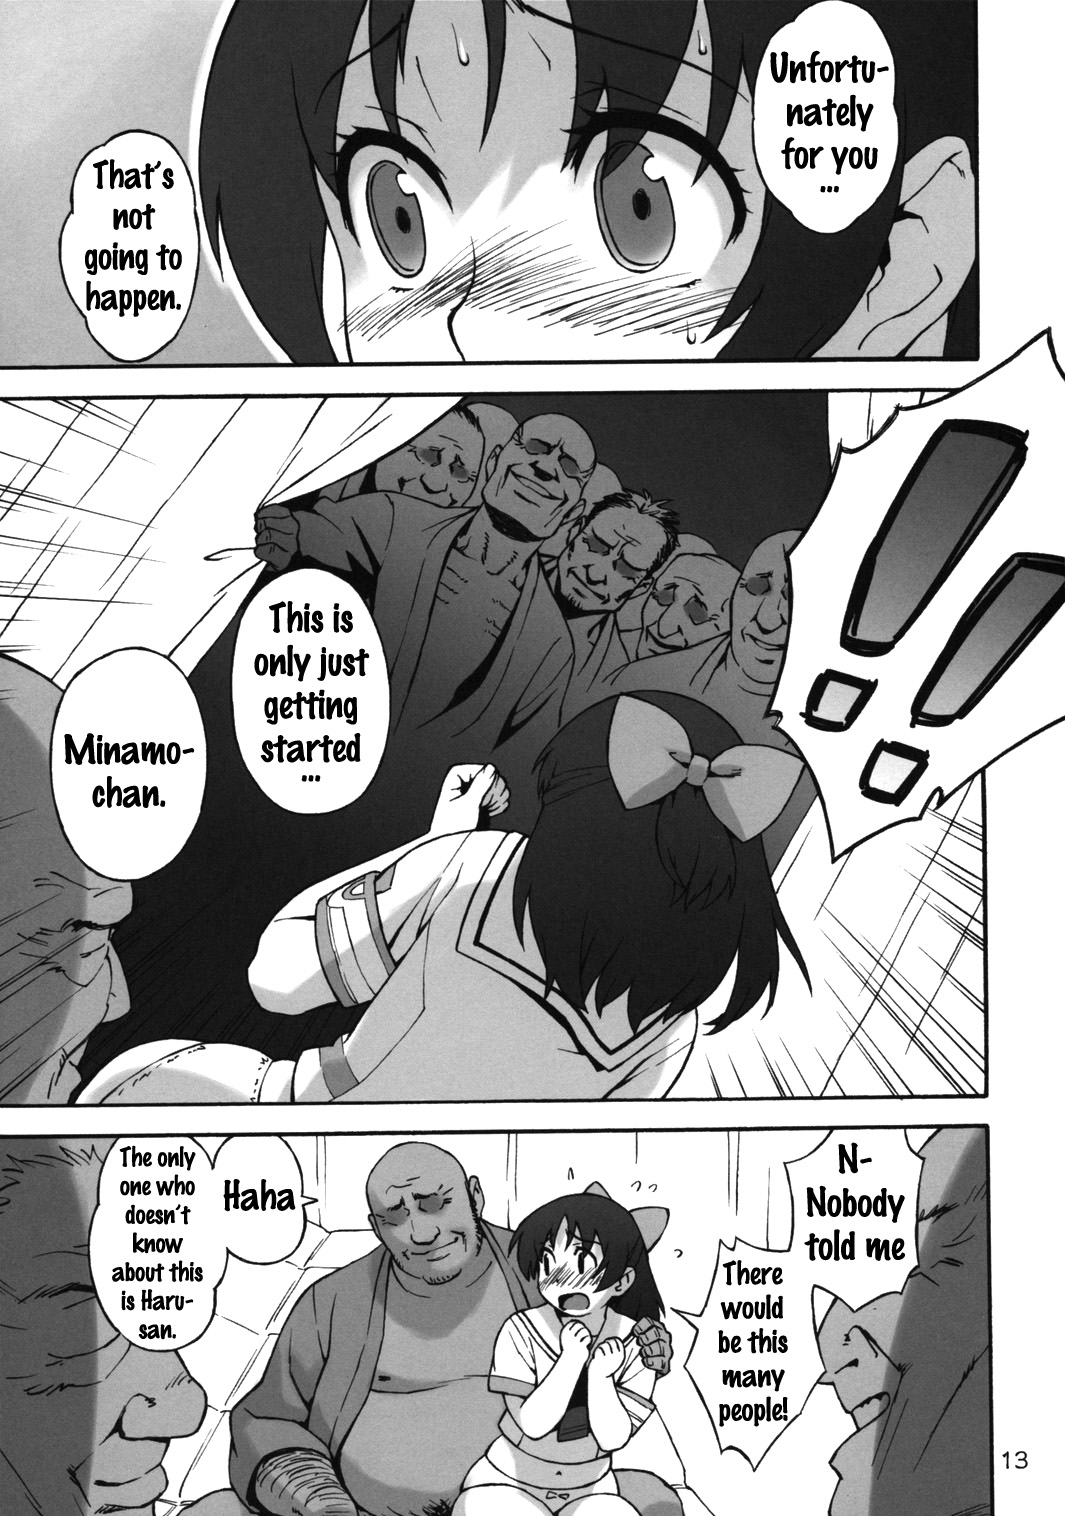 Fat Girl Slim - Page 12 - HentaiEra